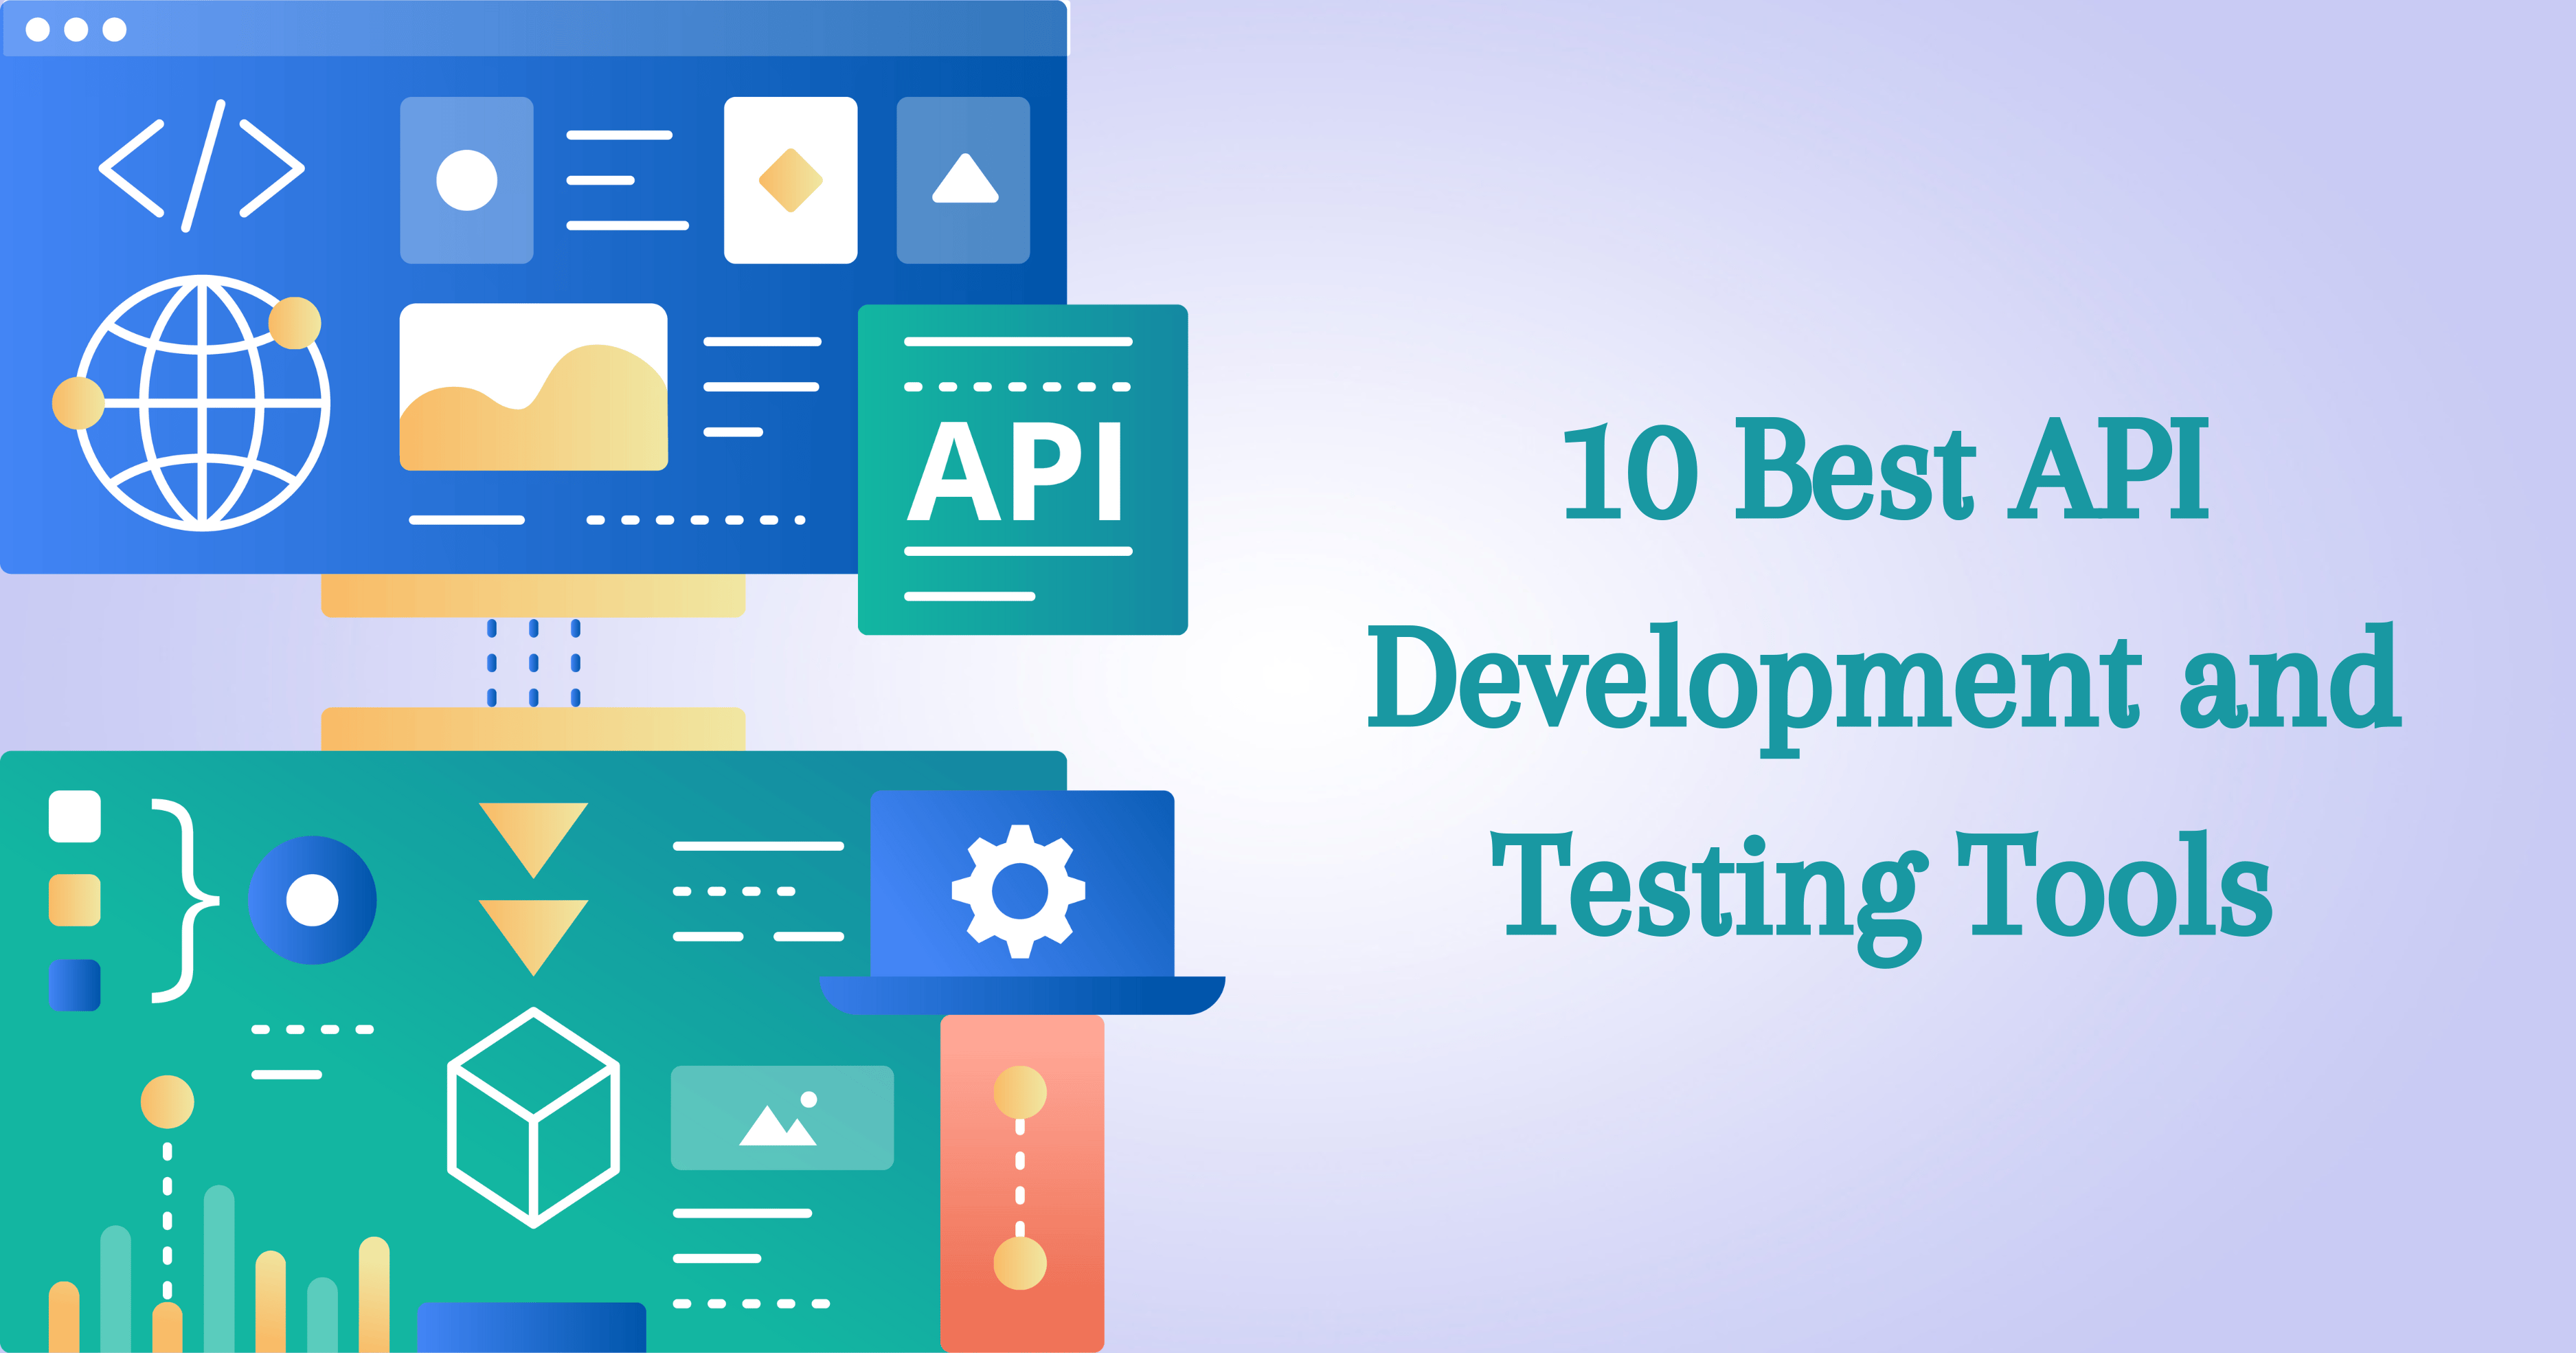 Guide to the 10 Best API Development and Testing Tools